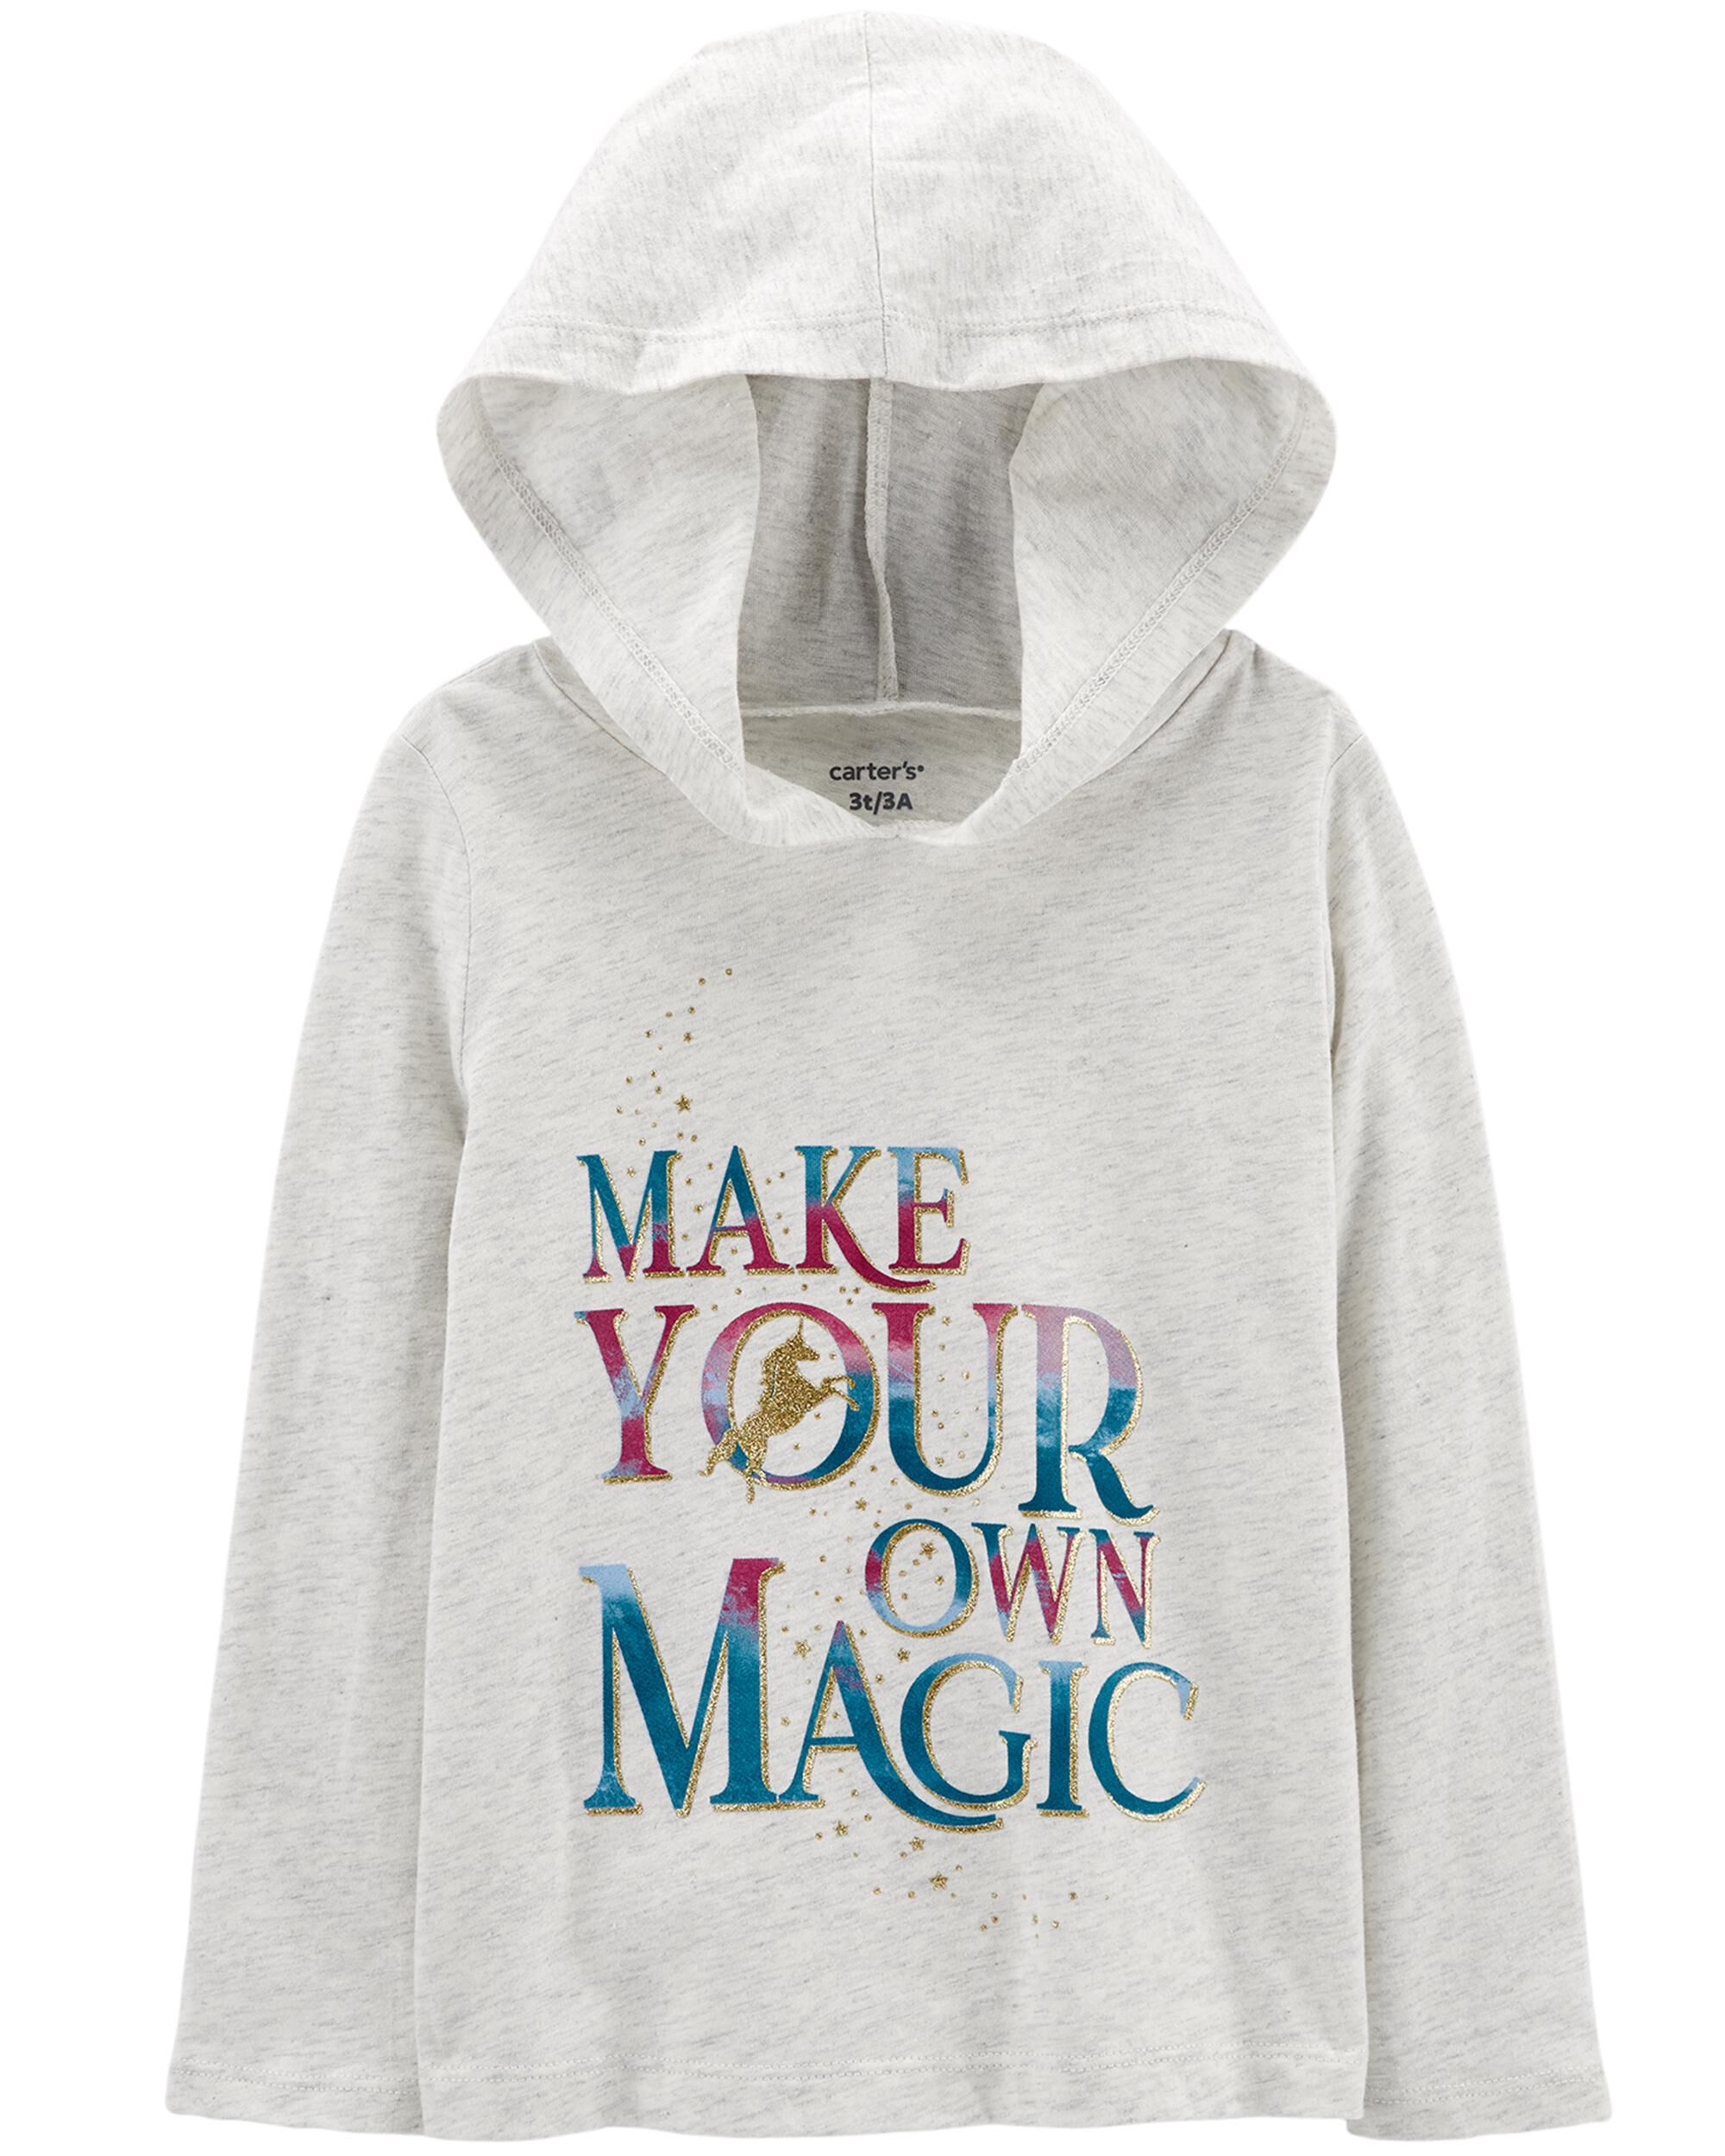 Carters Baby Make Your Own Magic Jersey Hoodie